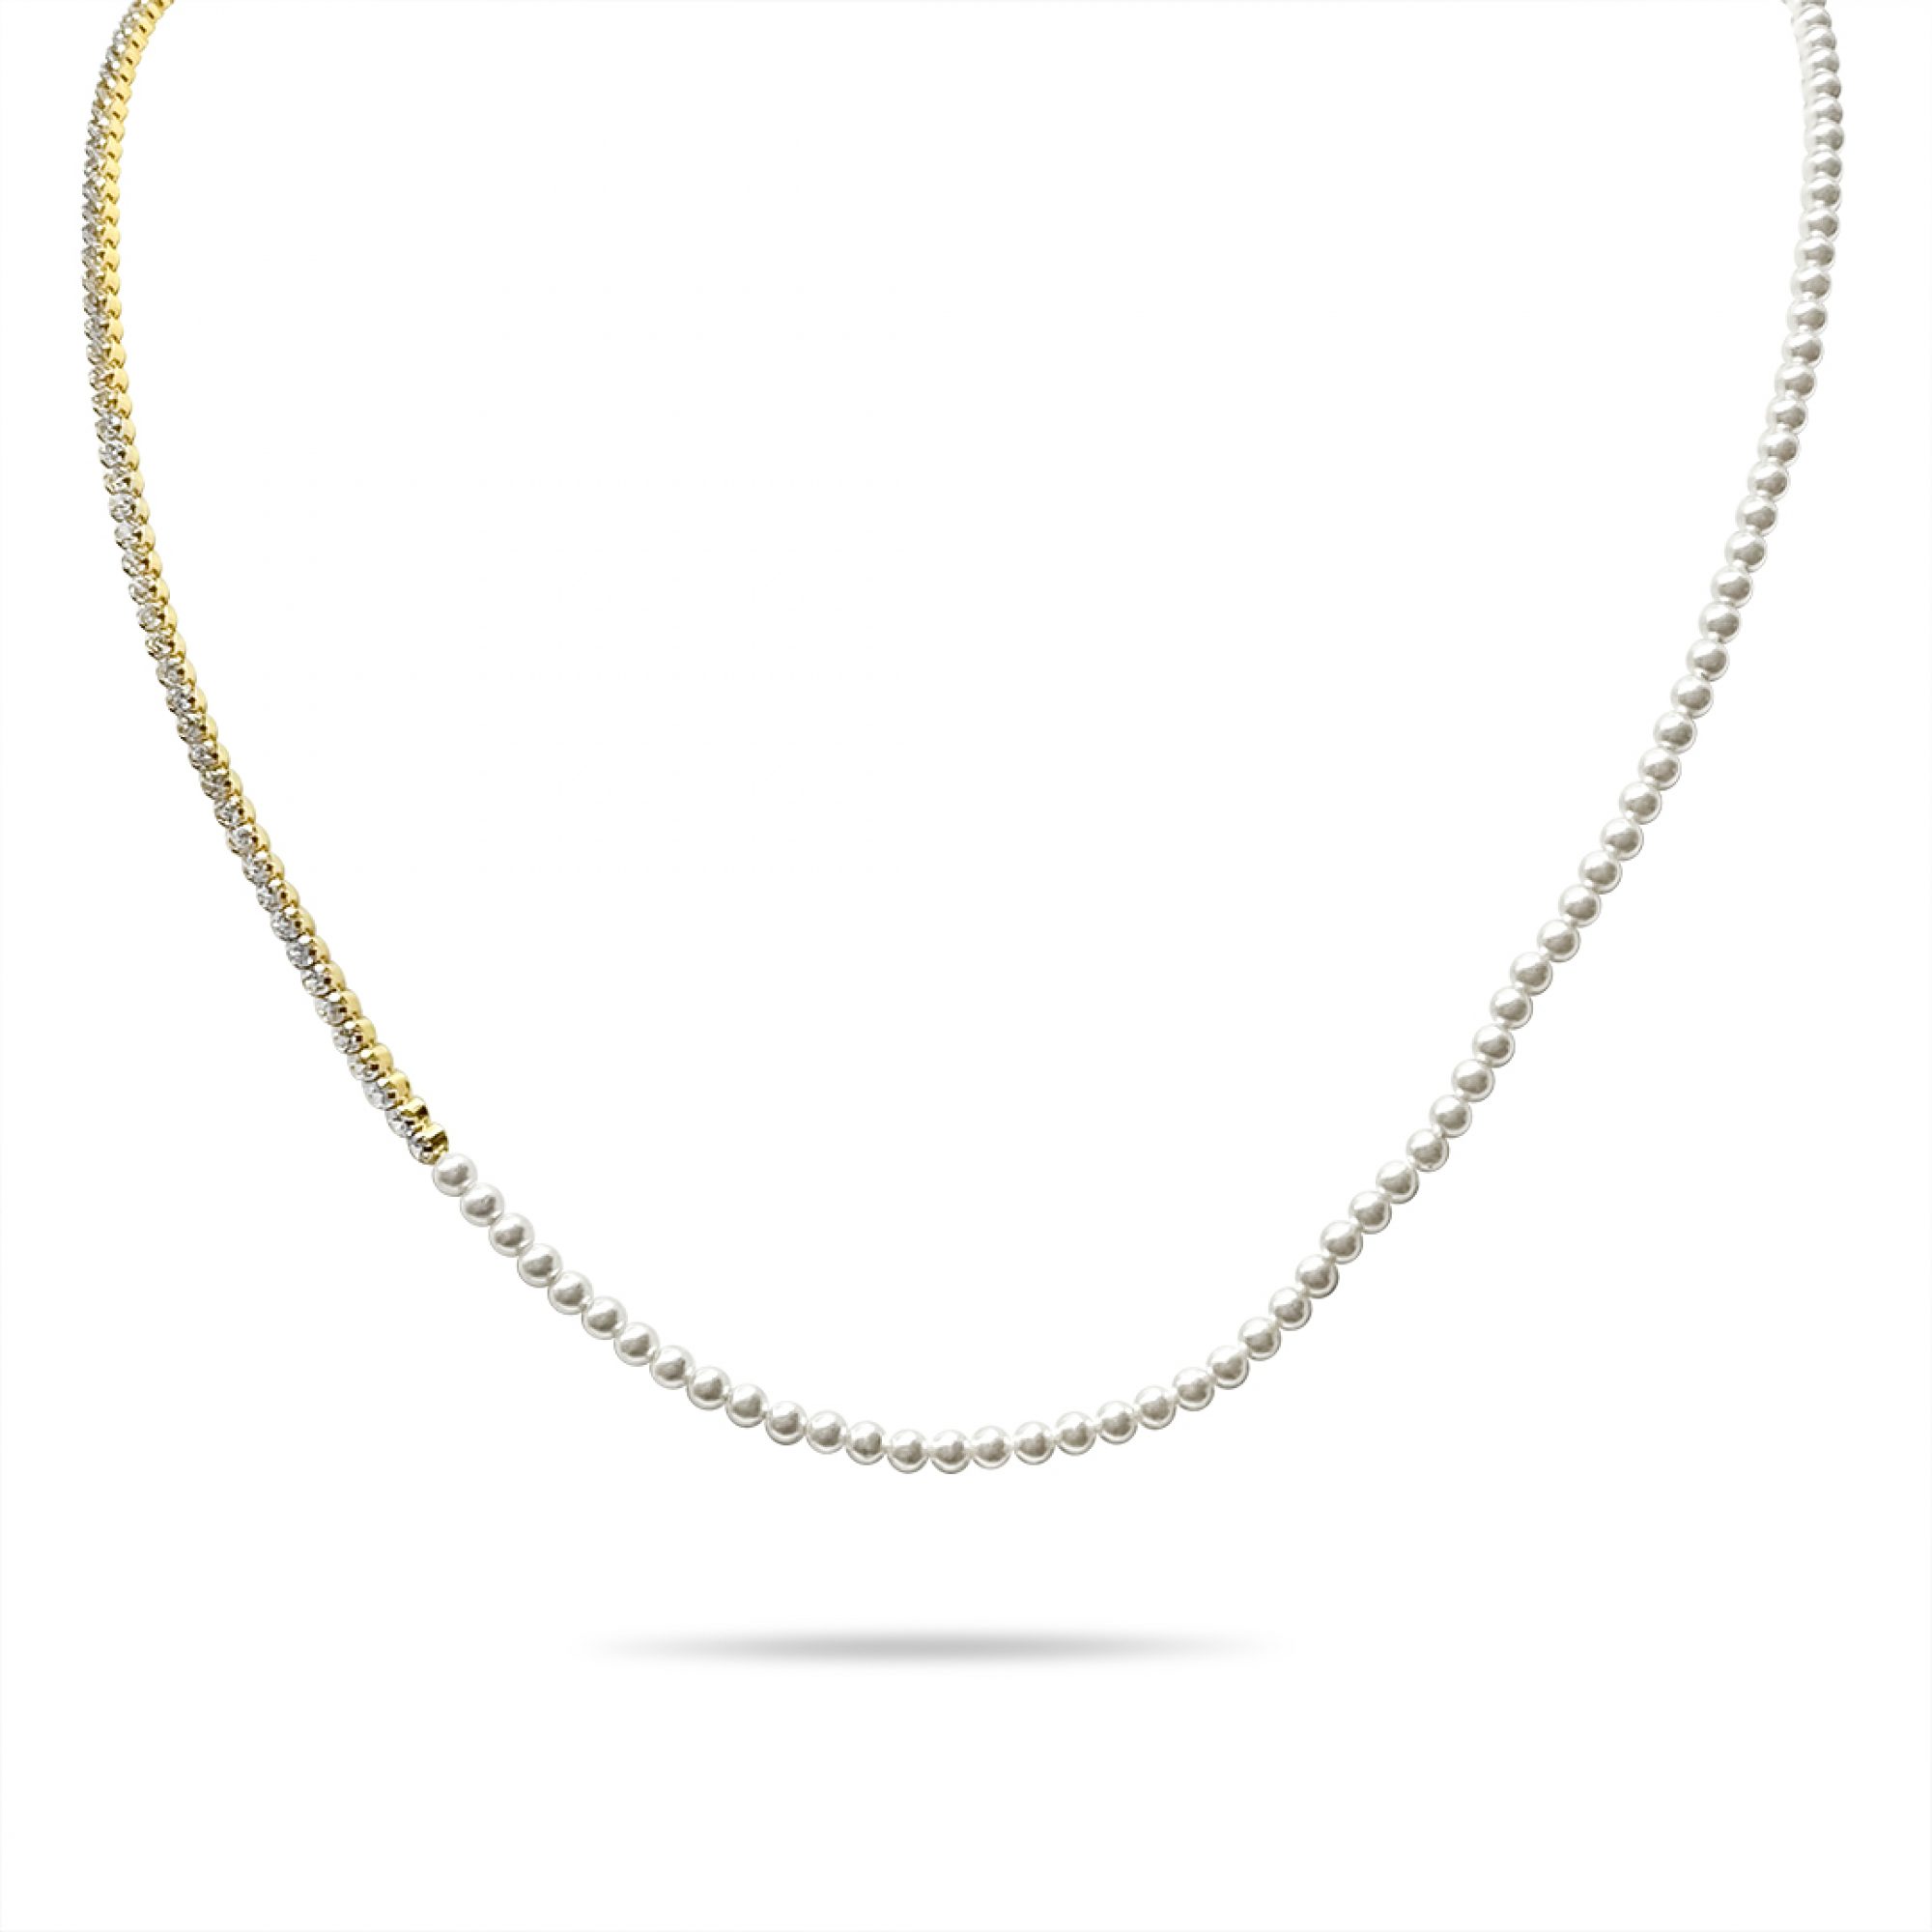 Gold plated necklace with zircon stones and pearls